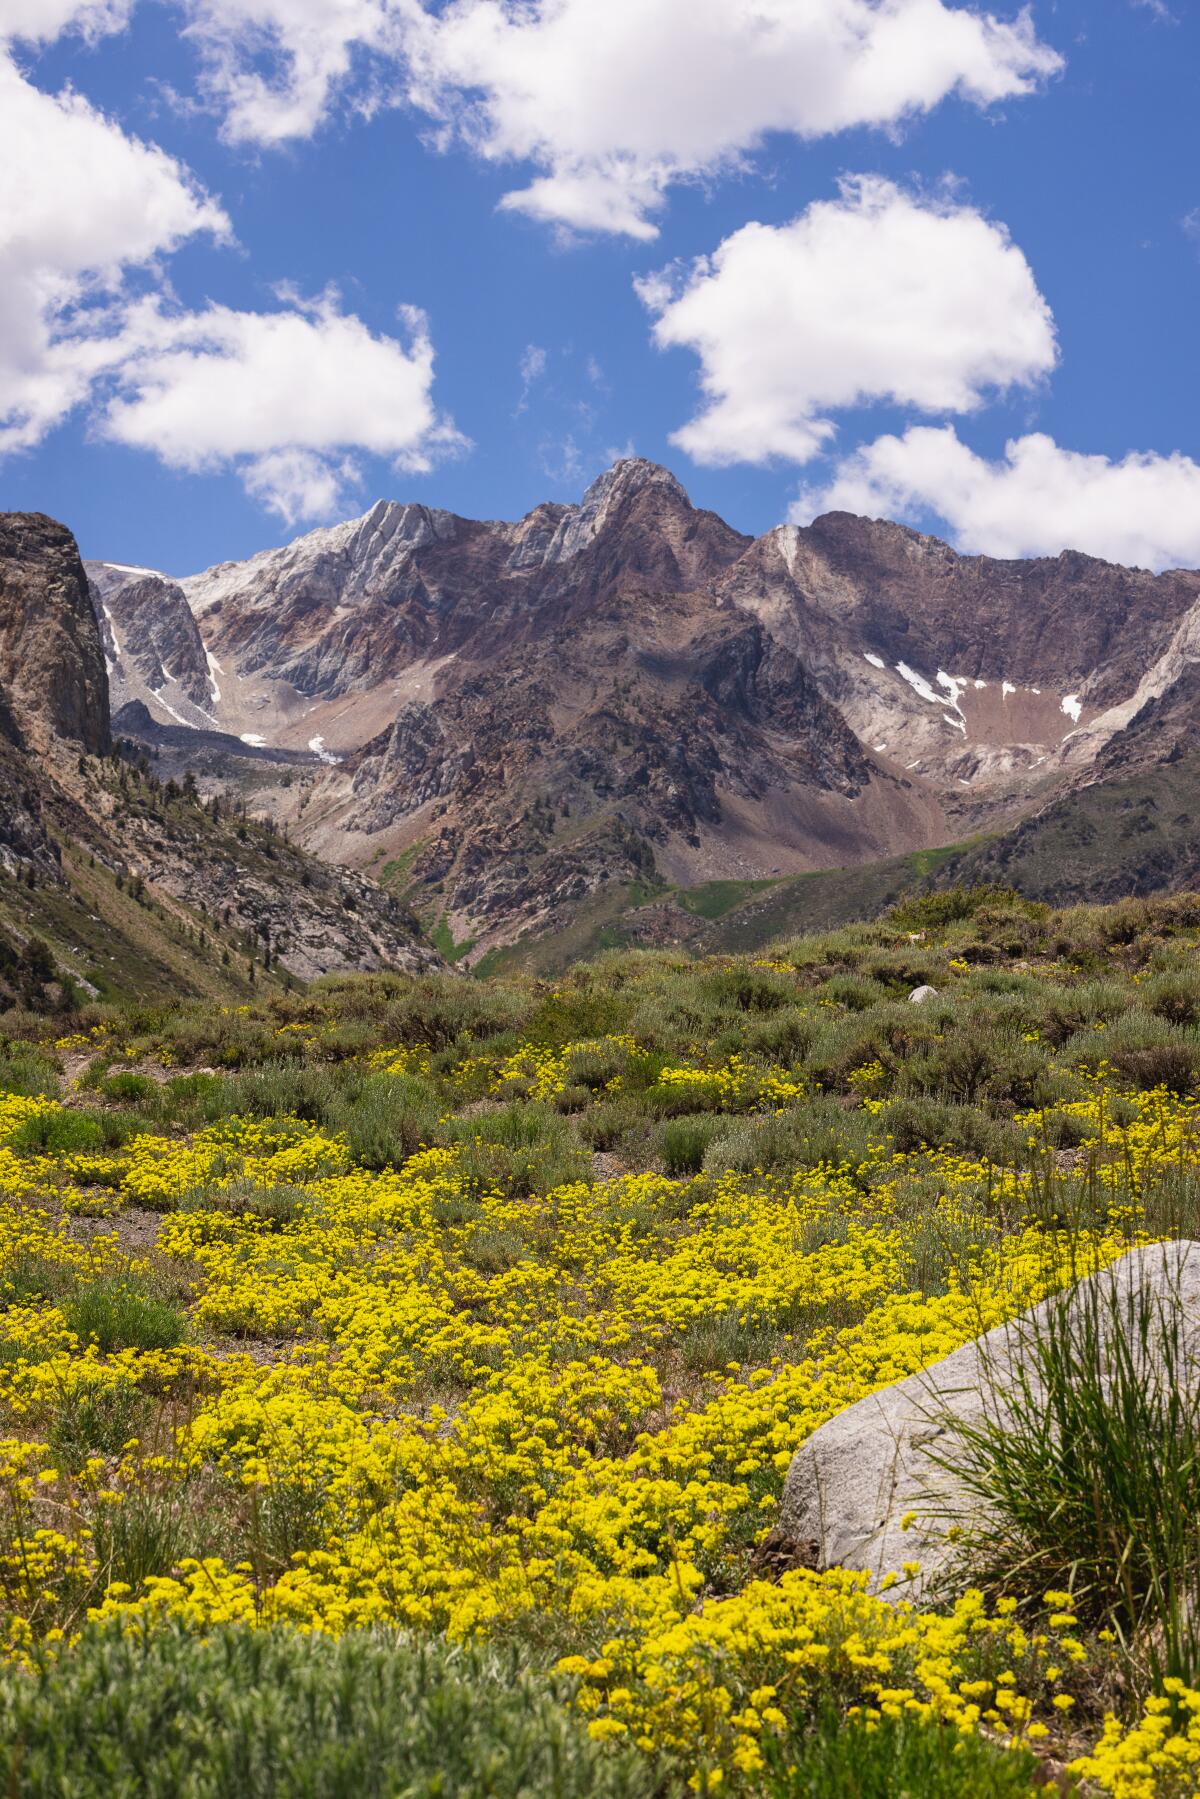 A field of yellow wildflowers spreads out in front of tall, rocky mountains.